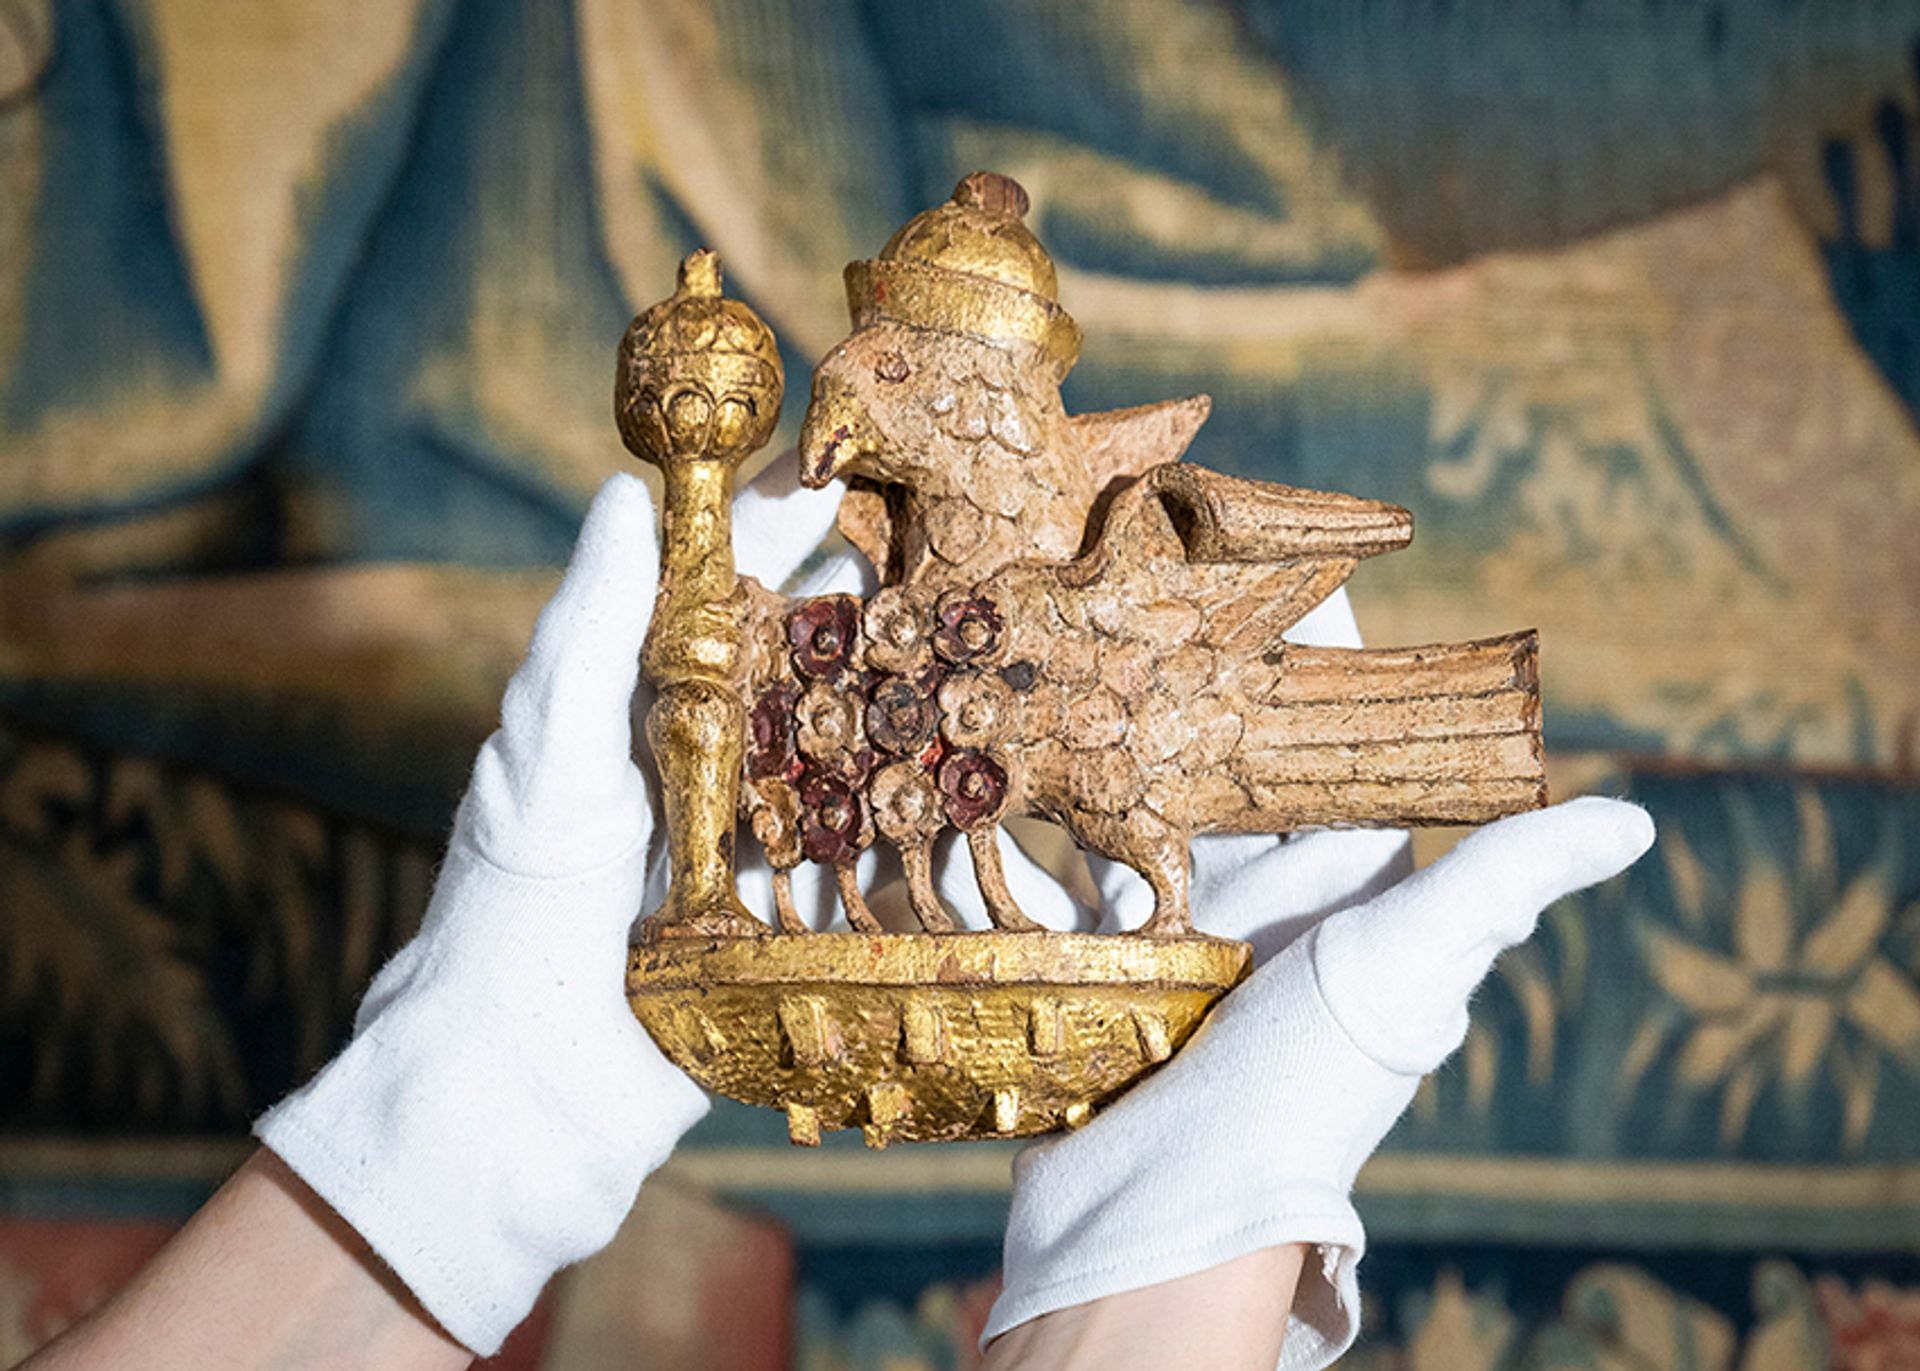 Anne Boleyn’s carved falcon goes on display at Hampton Court Palace today. Following new research, the carving is now believed to have been created during Henry VIII’s marriage to Boleyn, and once formed part of the Great Hall’s original decoration © Historic Royal Palaces